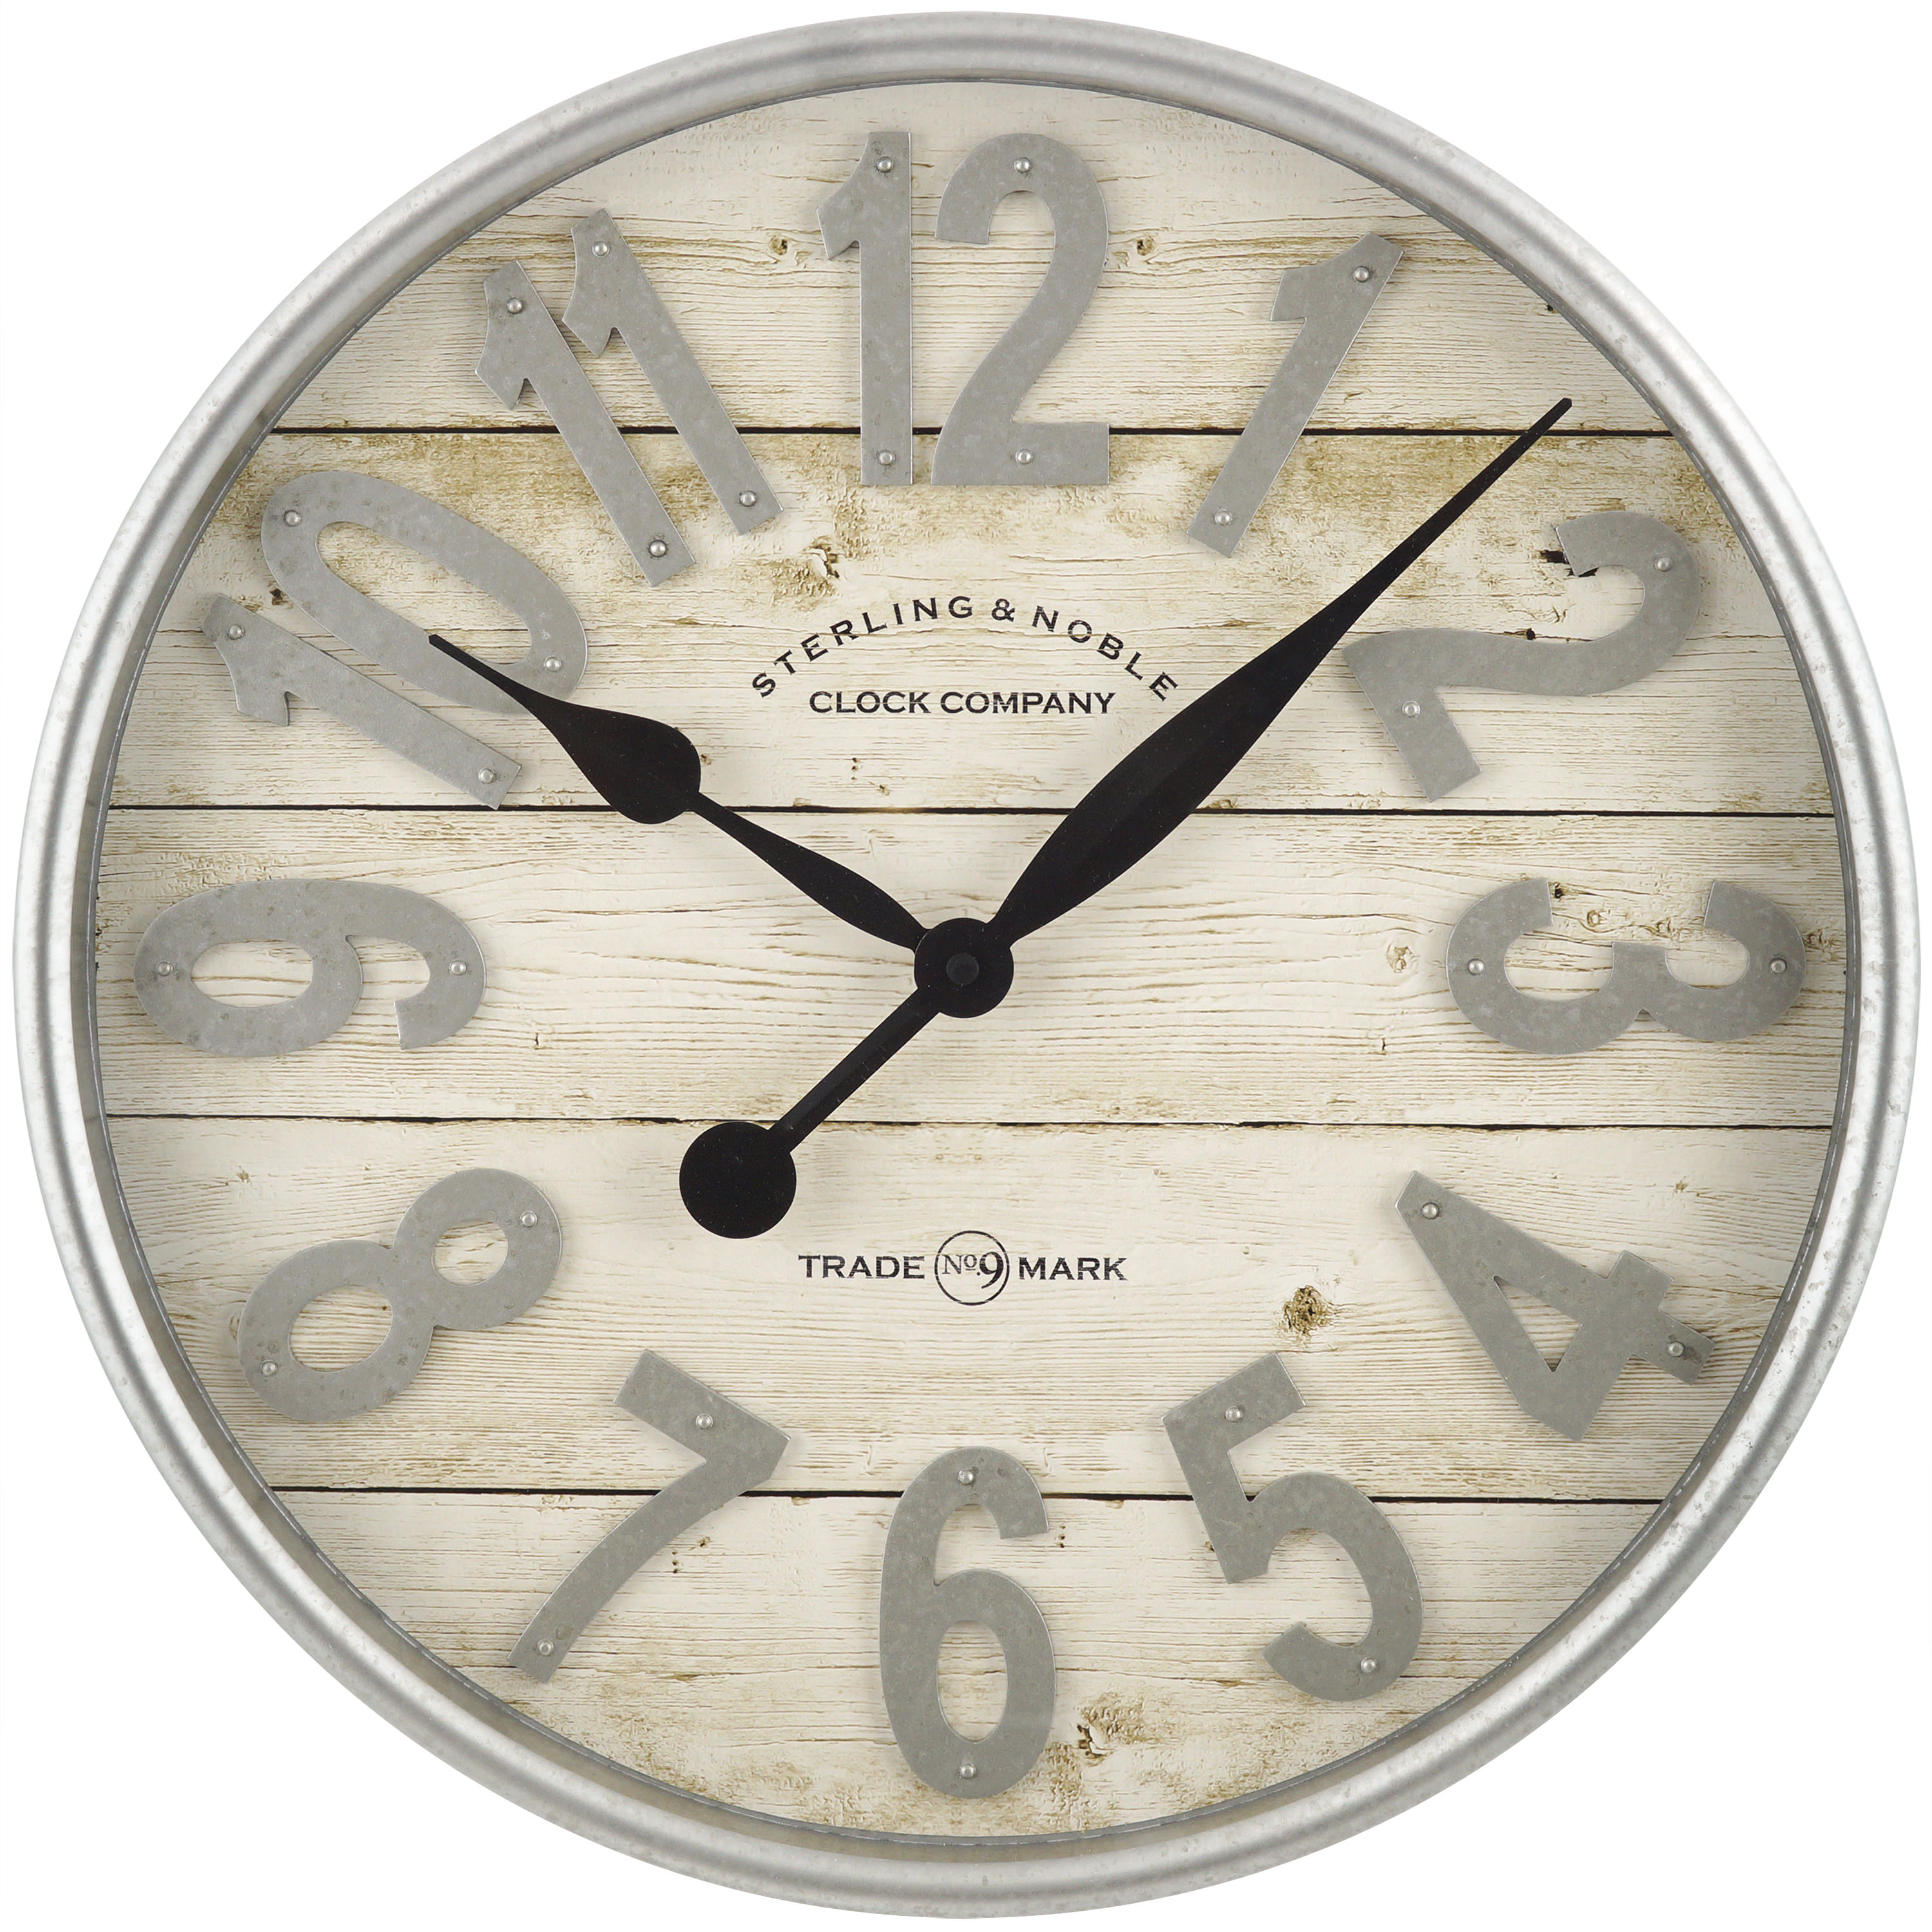 Better Homes & Gardens Farmhouse Plank Galvanized Wall Clock - discover a host of lovely rustic decor in this round up of galvanized metal farmhouse style and vintage chic design splendor! #modernfarmhouse #rusticdecor